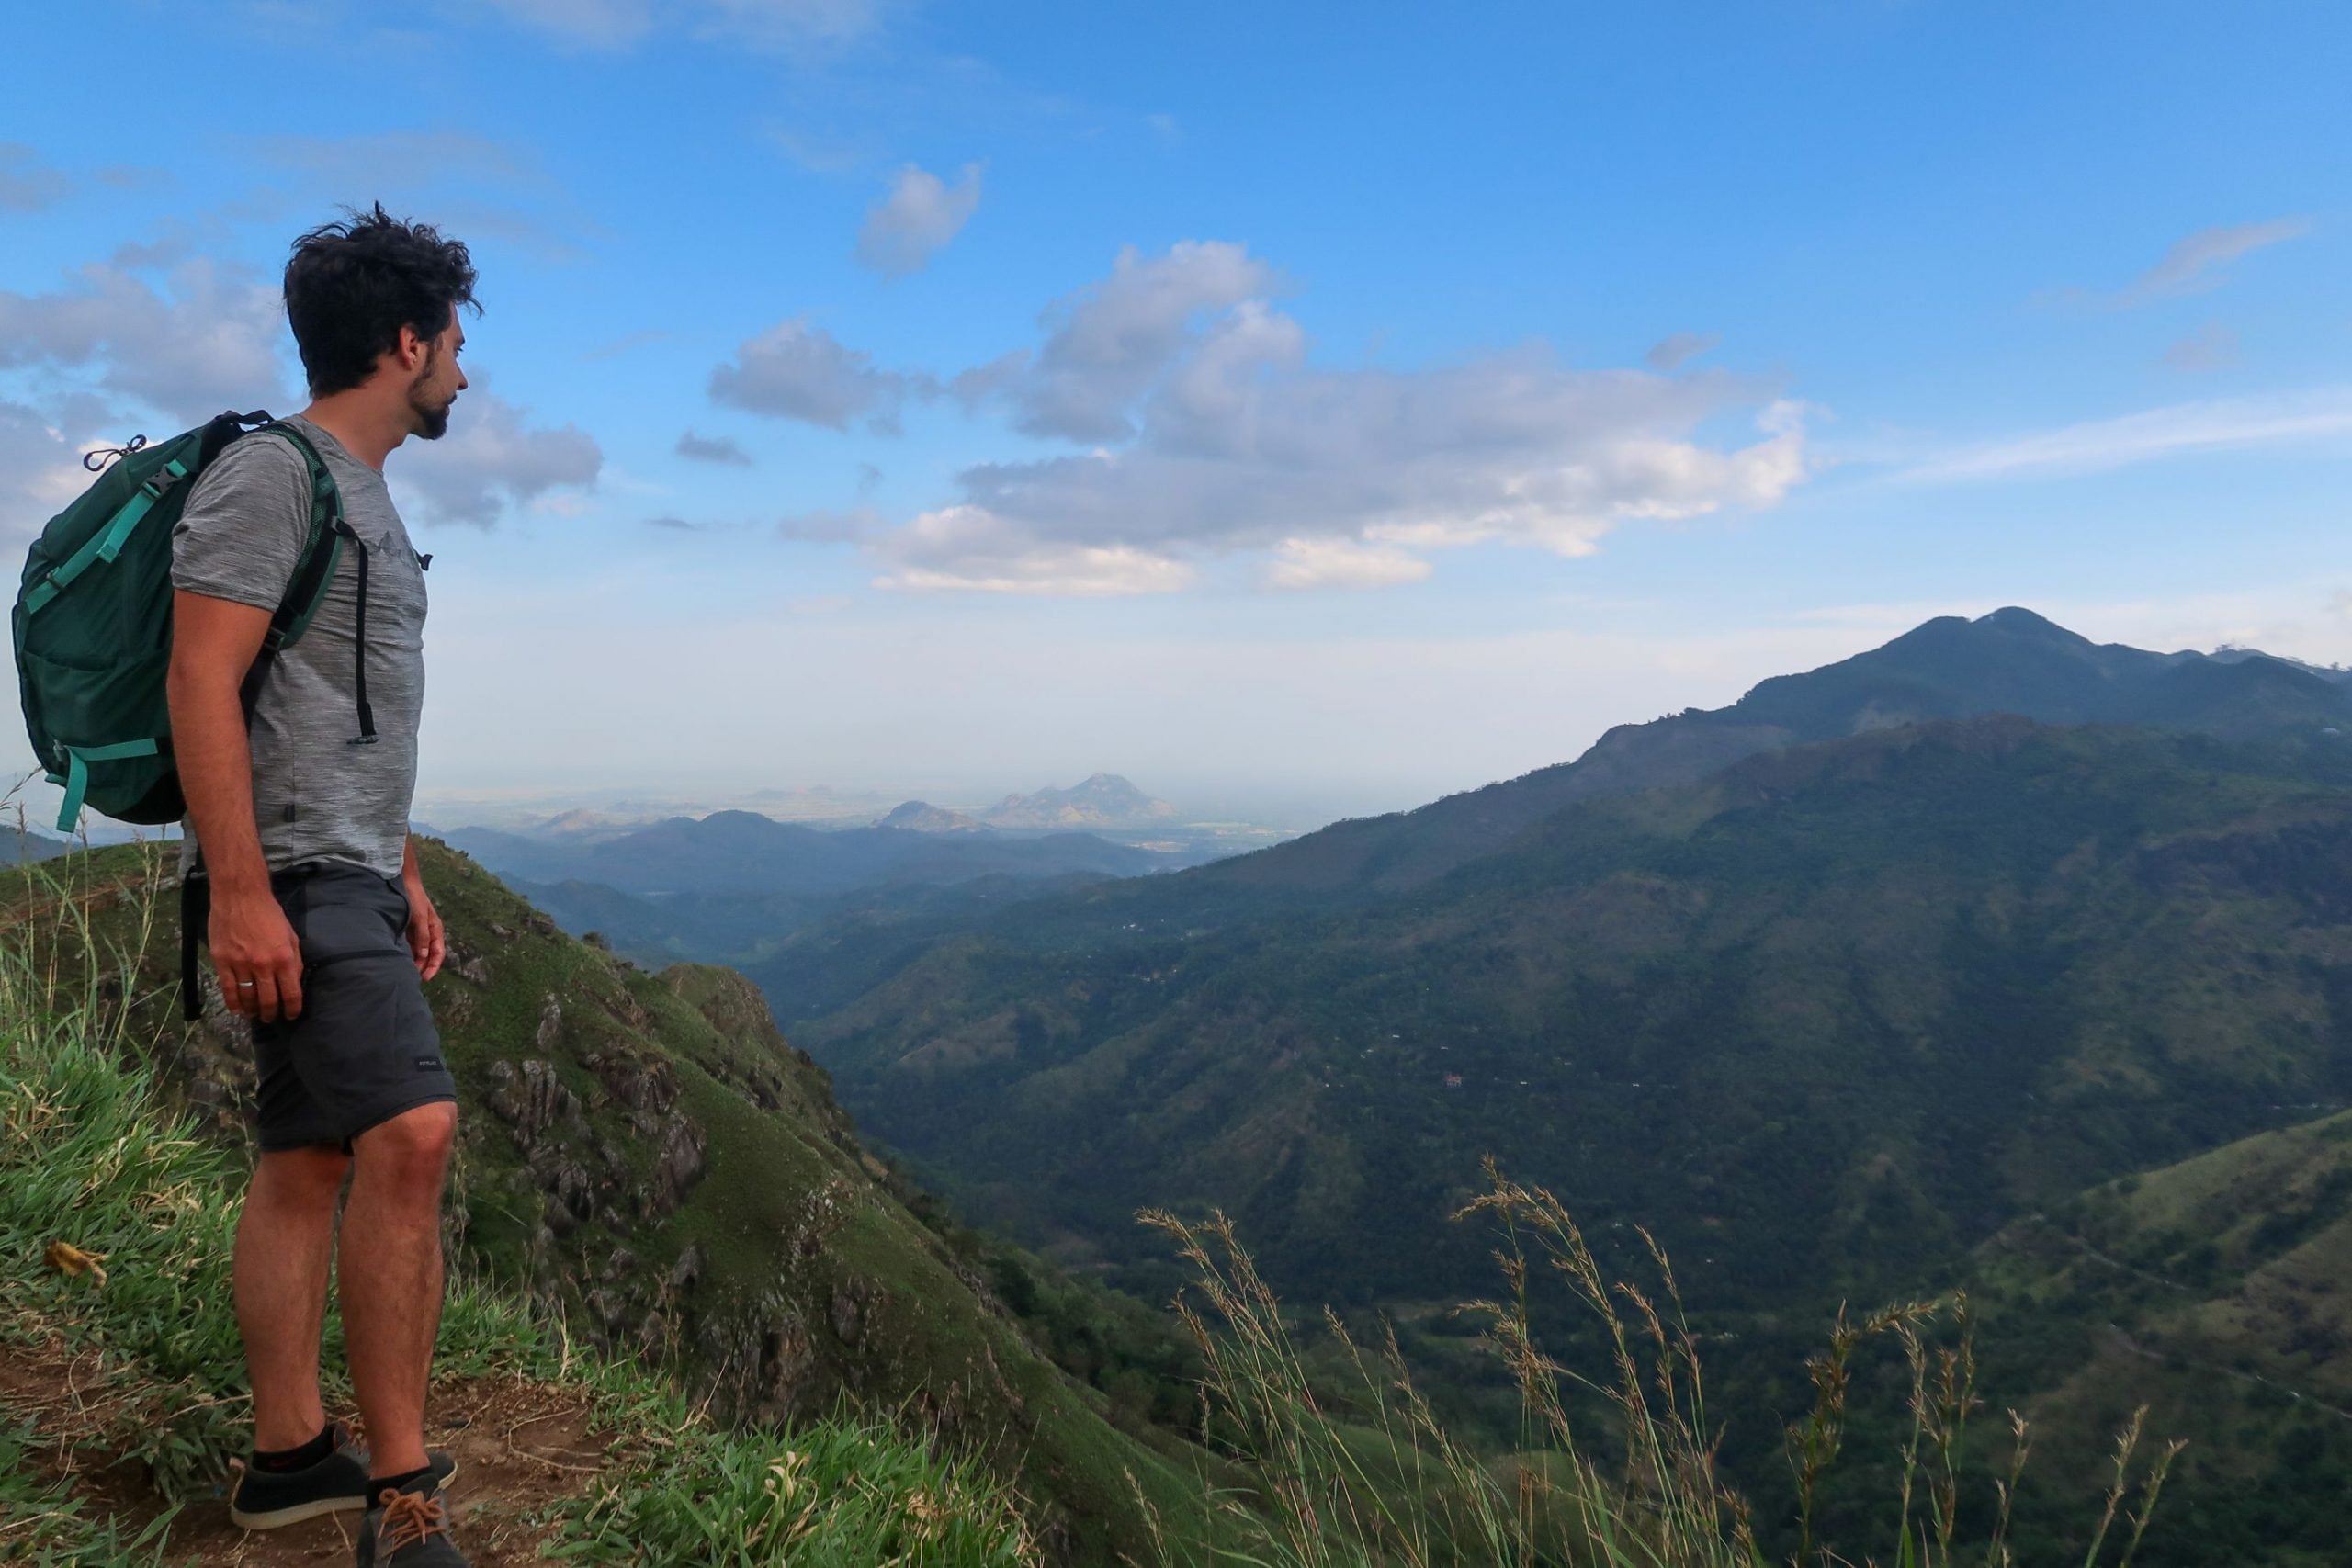 Hiking on the truly remote trails of the Knuckles mountain range in Sri Lanka.